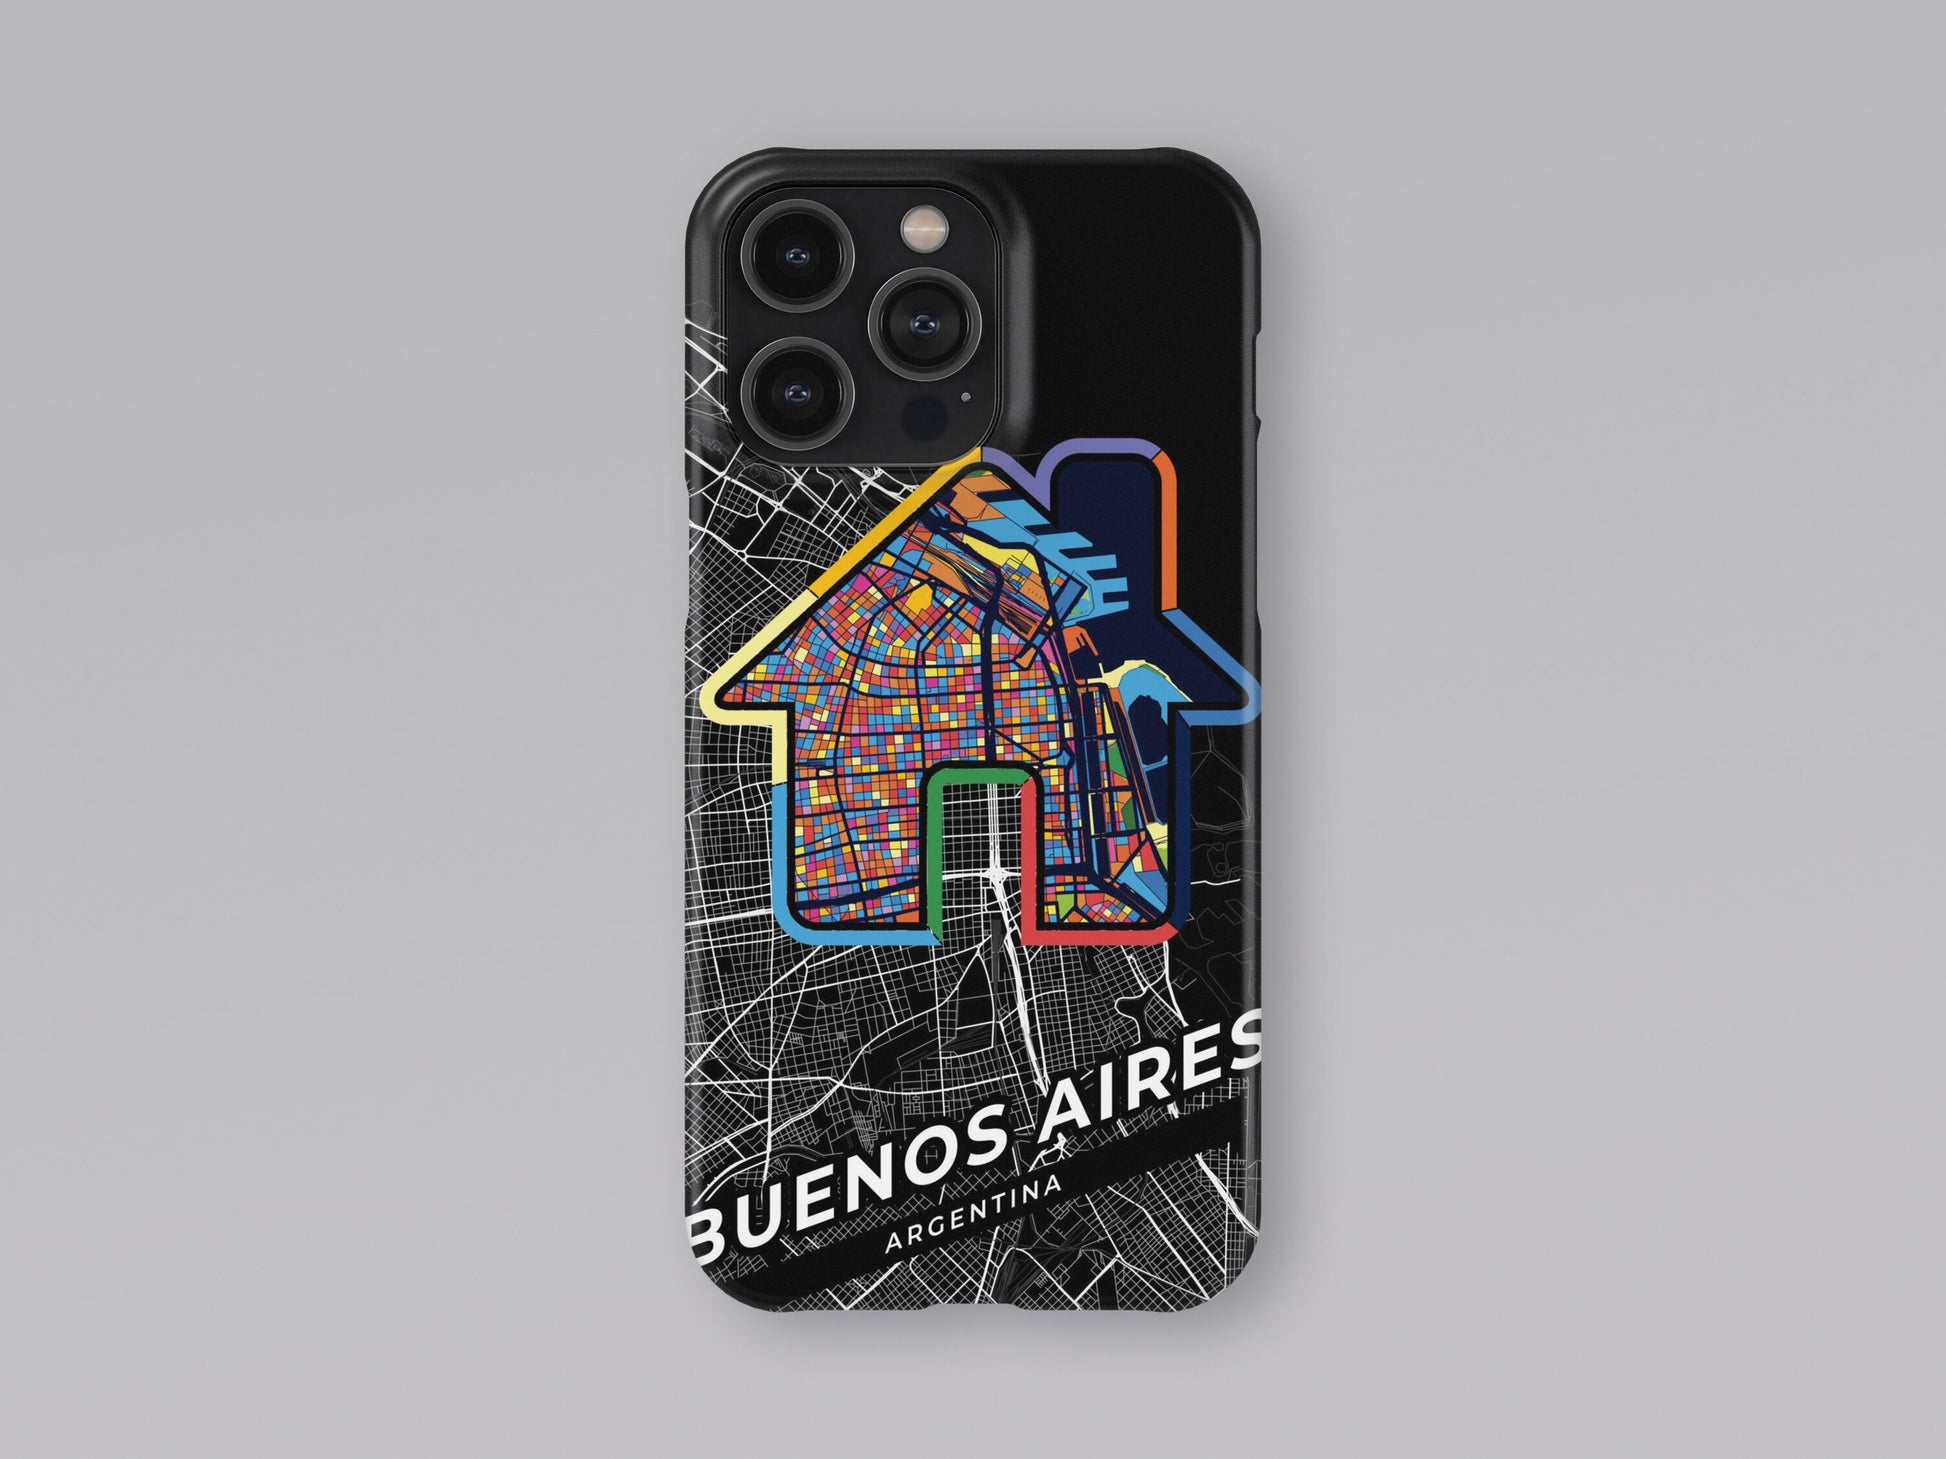 Buenos Aires Argentina slim phone case with colorful icon. Birthday, wedding or housewarming gift. Couple match cases. 3